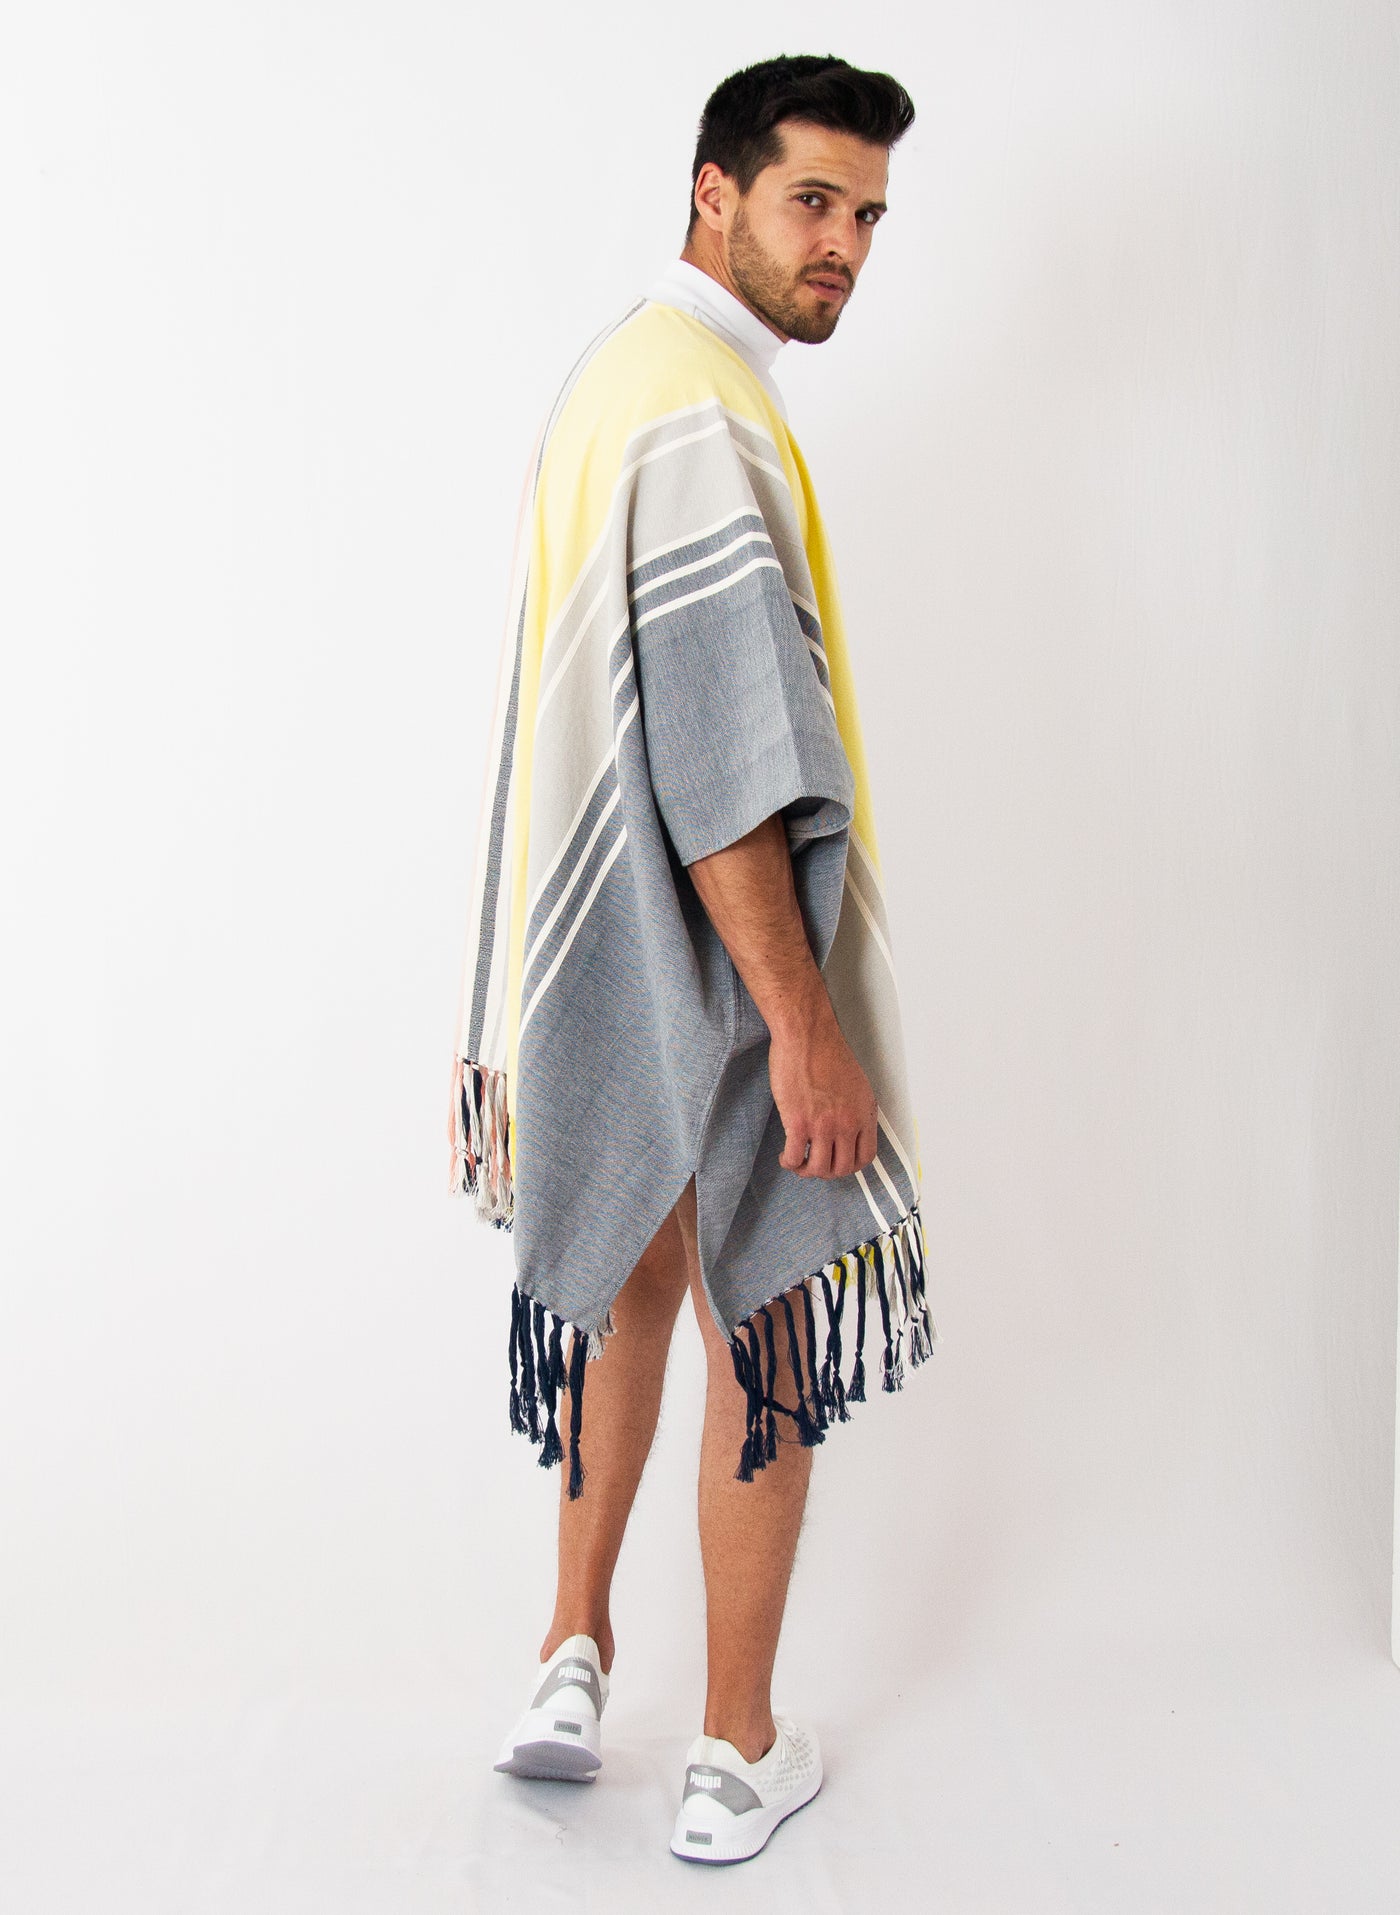 THE COLORS PONCHO RCANO x CANDOR